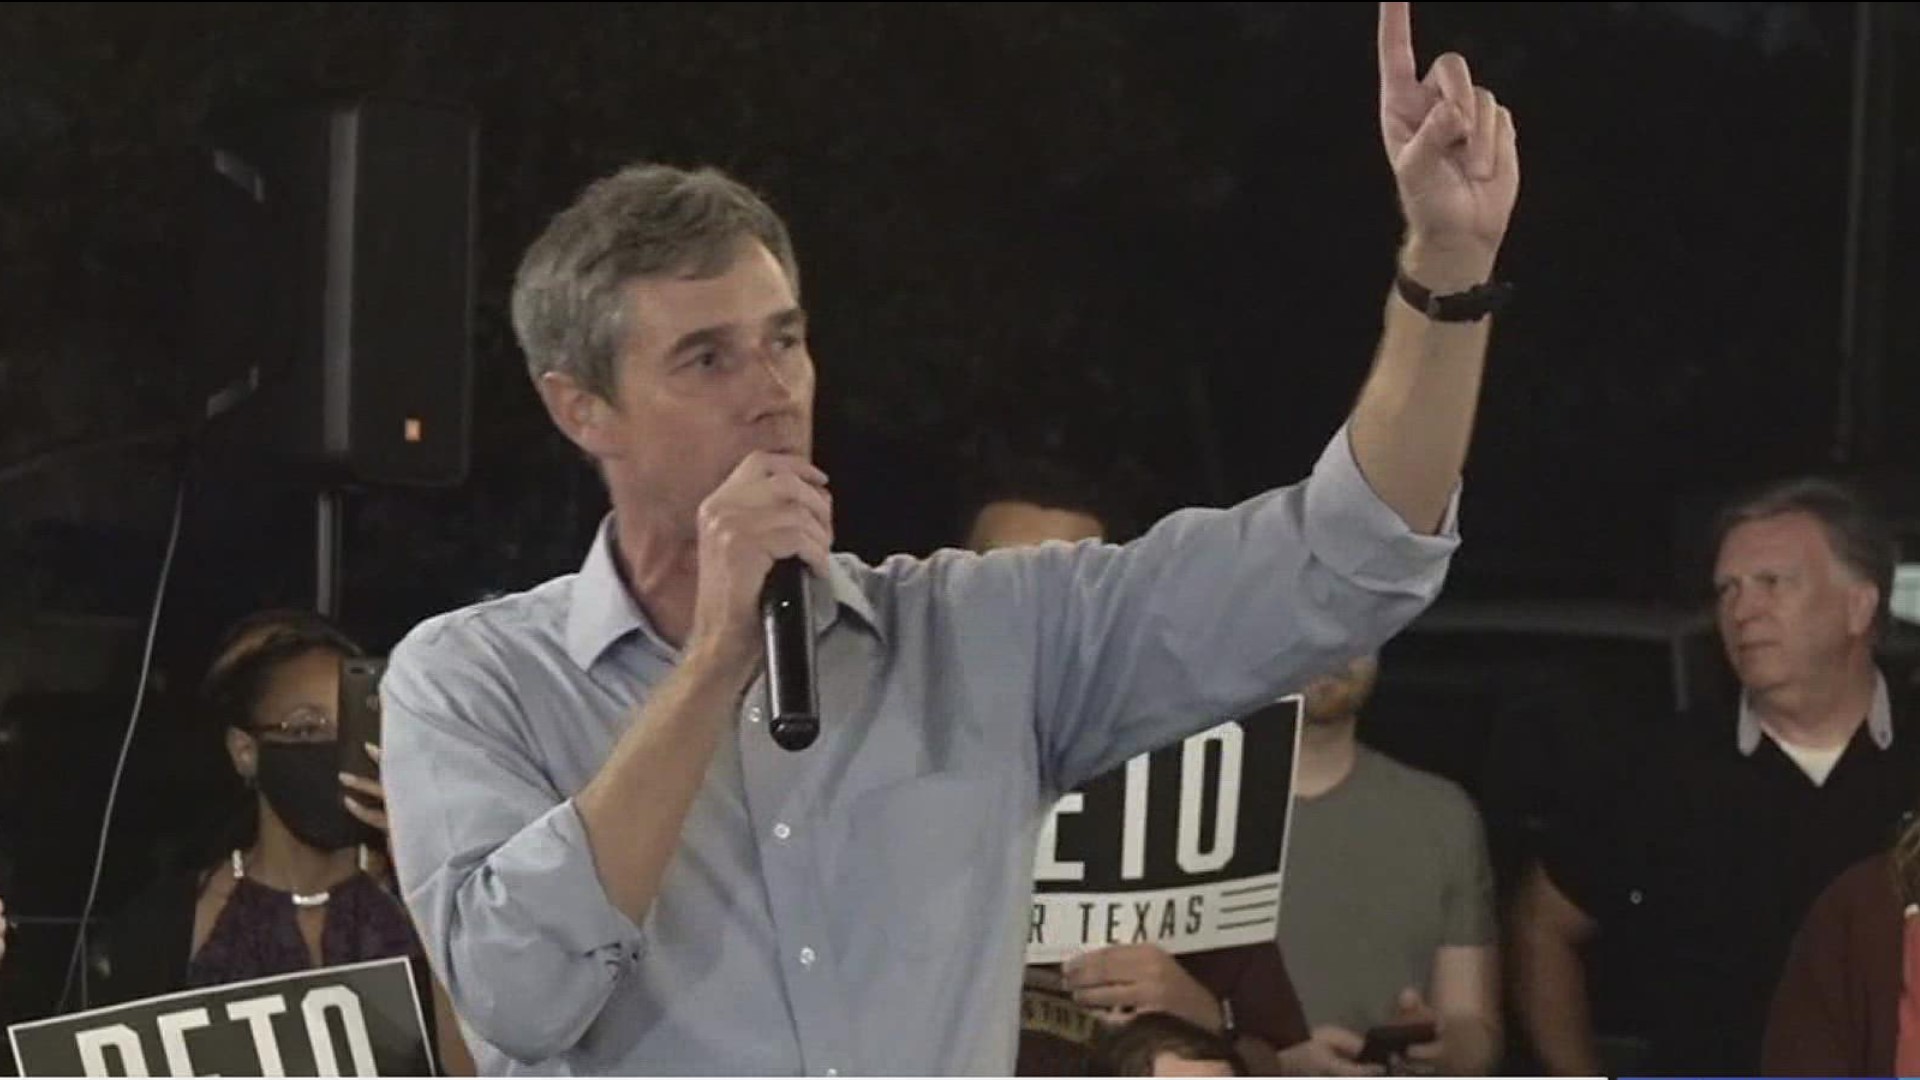 O’Rourke faces an uphill battle a recent poll shows that Abbott is in a double-digit lead if they face off next year. The Democrat came to rally supporters ahead of